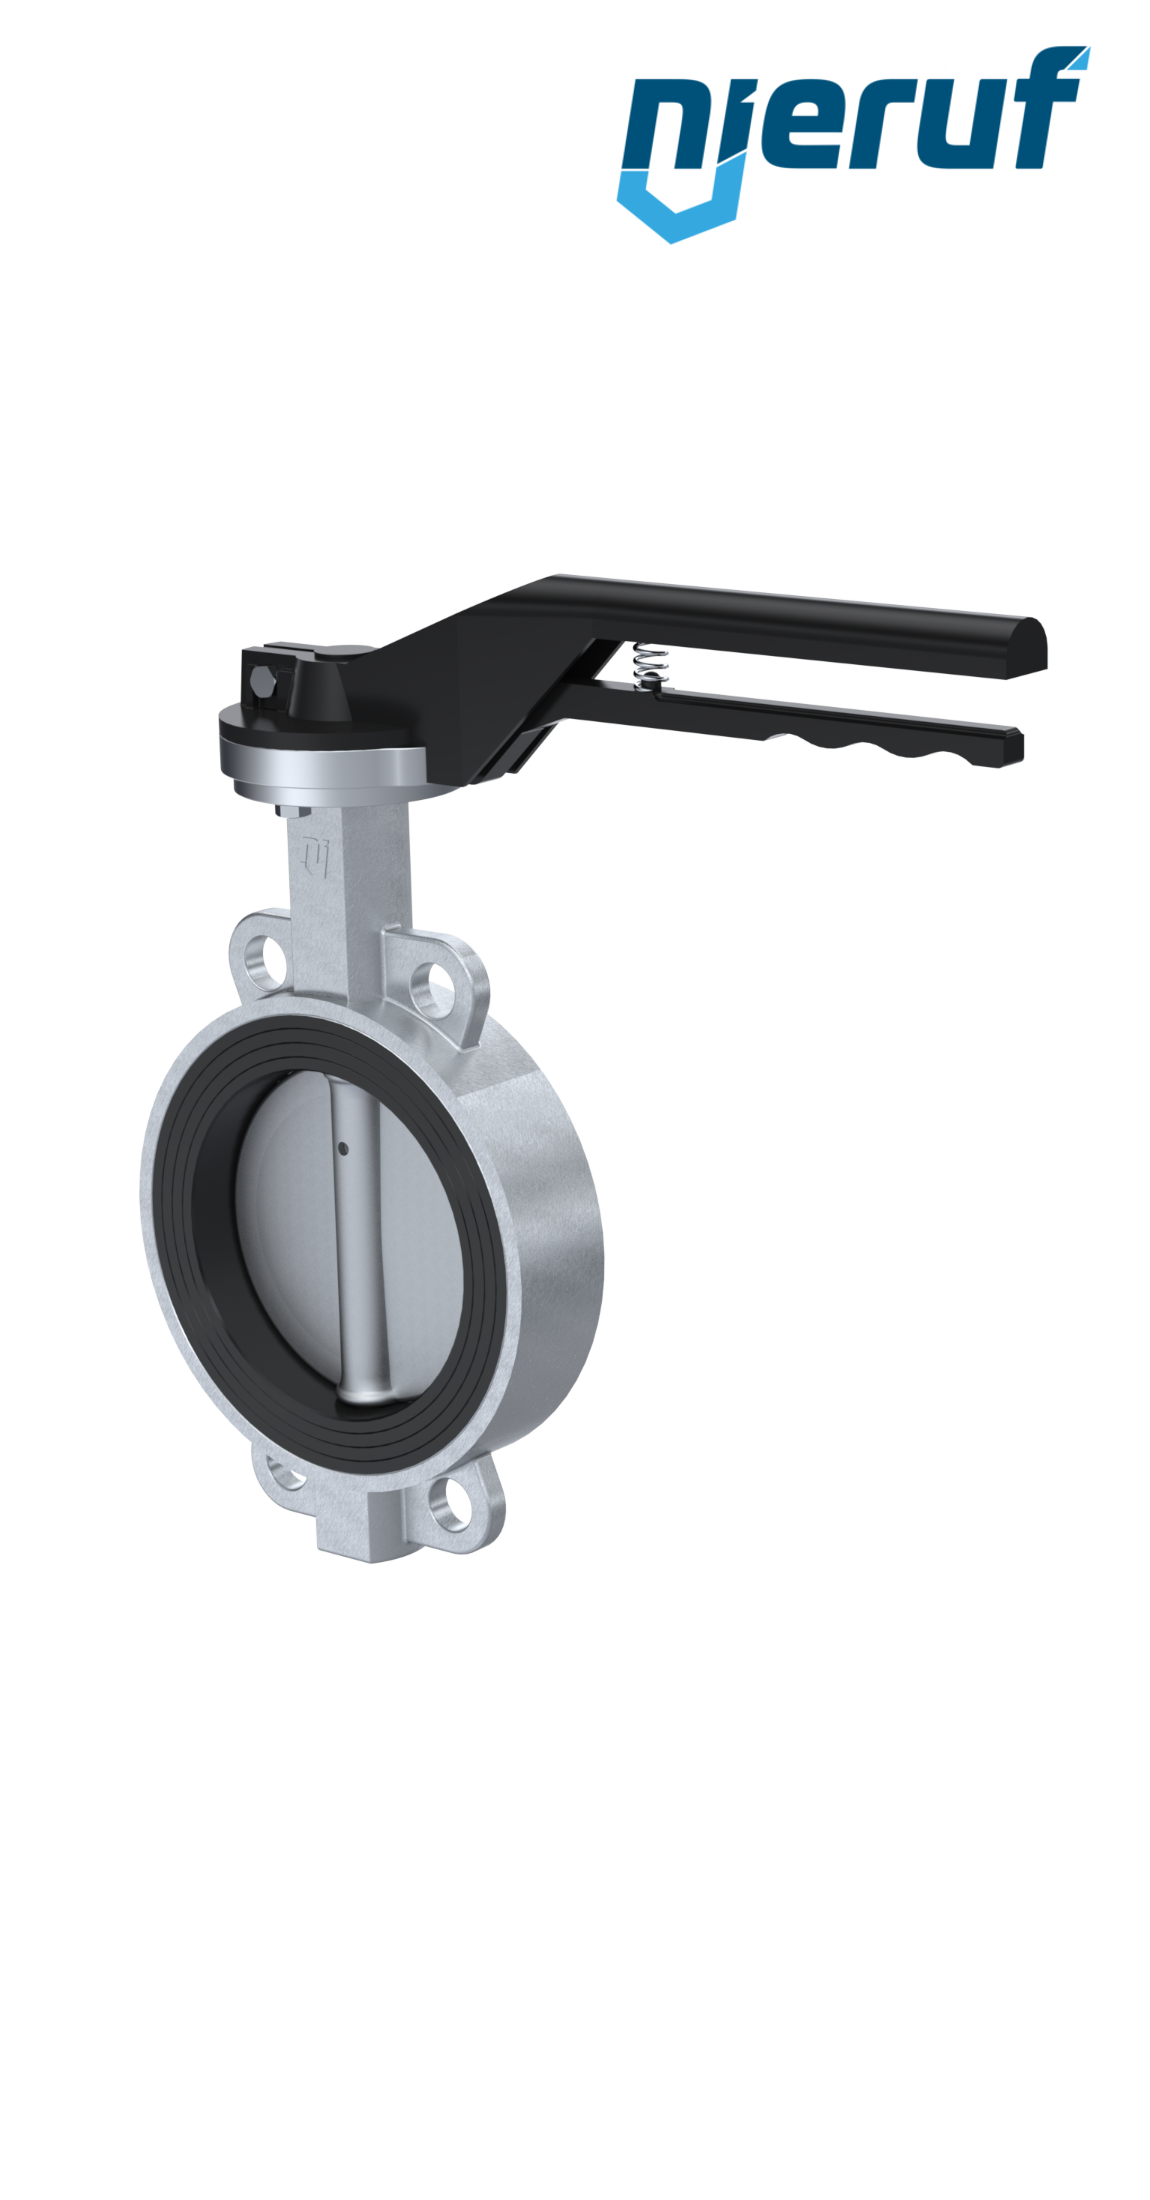 Butterfly-valve-stainless-steel DN 50 PN16 AK08 EPDM notch lever